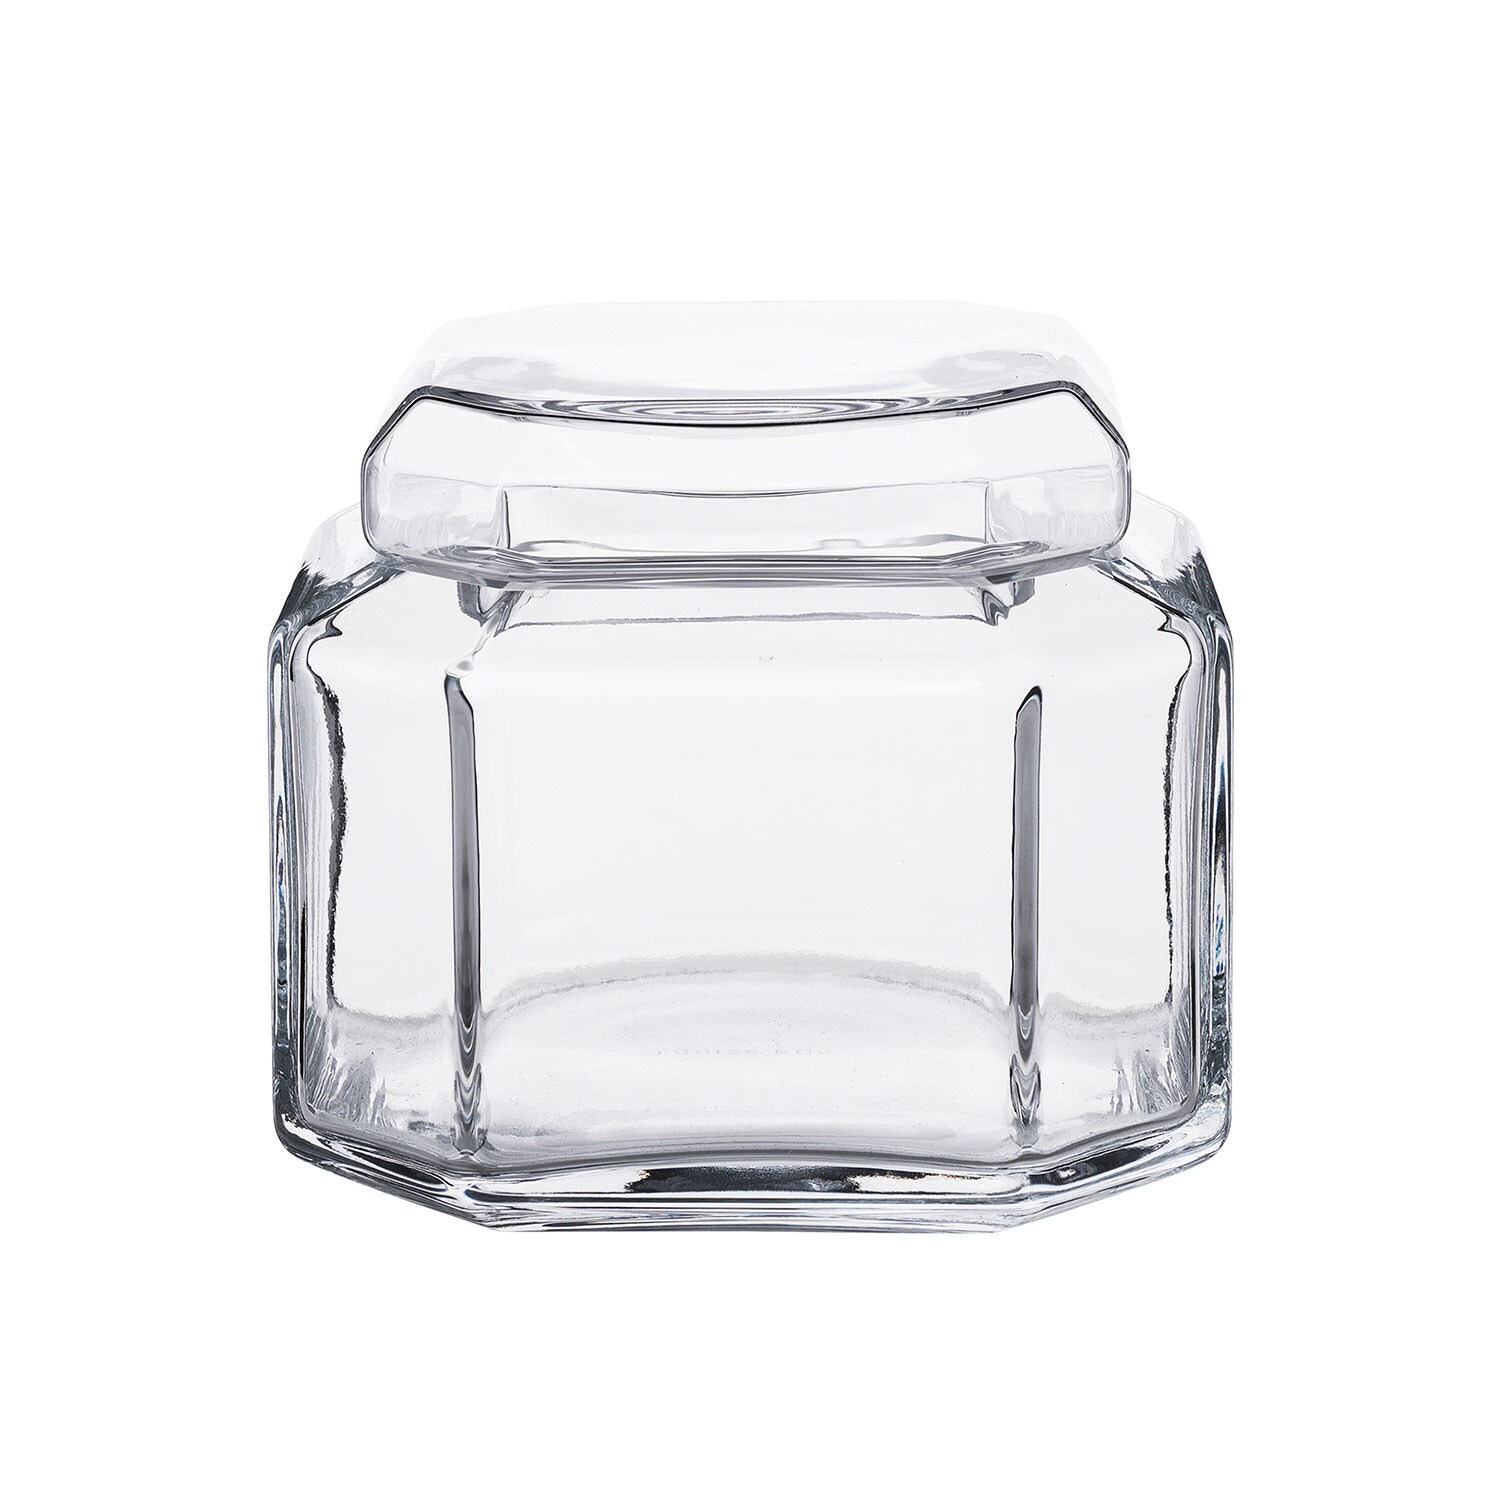 Koziol 5825535 TOMMY Toothbrush Holder One Size Crystal Clear